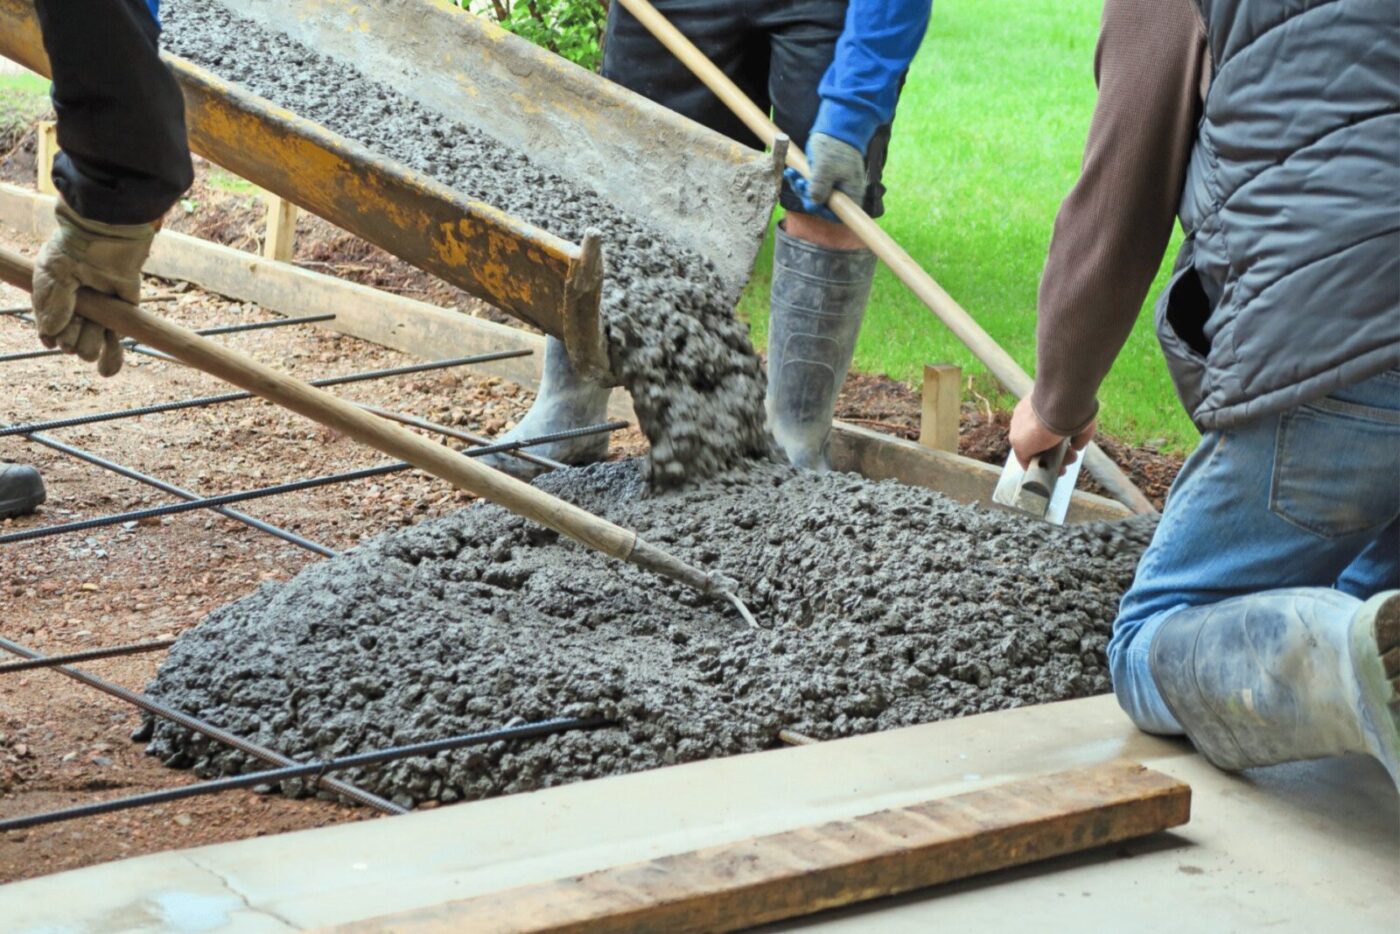 Three workers from Naples Concrete Solutions are pouring and spreading concrete over a wooden and metal framework using shovels and rakes. One worker, wearing rubber boots and a blue jacket, assists as the gray, wet concrete flows from a chute. The ground and grass in Naples, FL can be seen nearby.